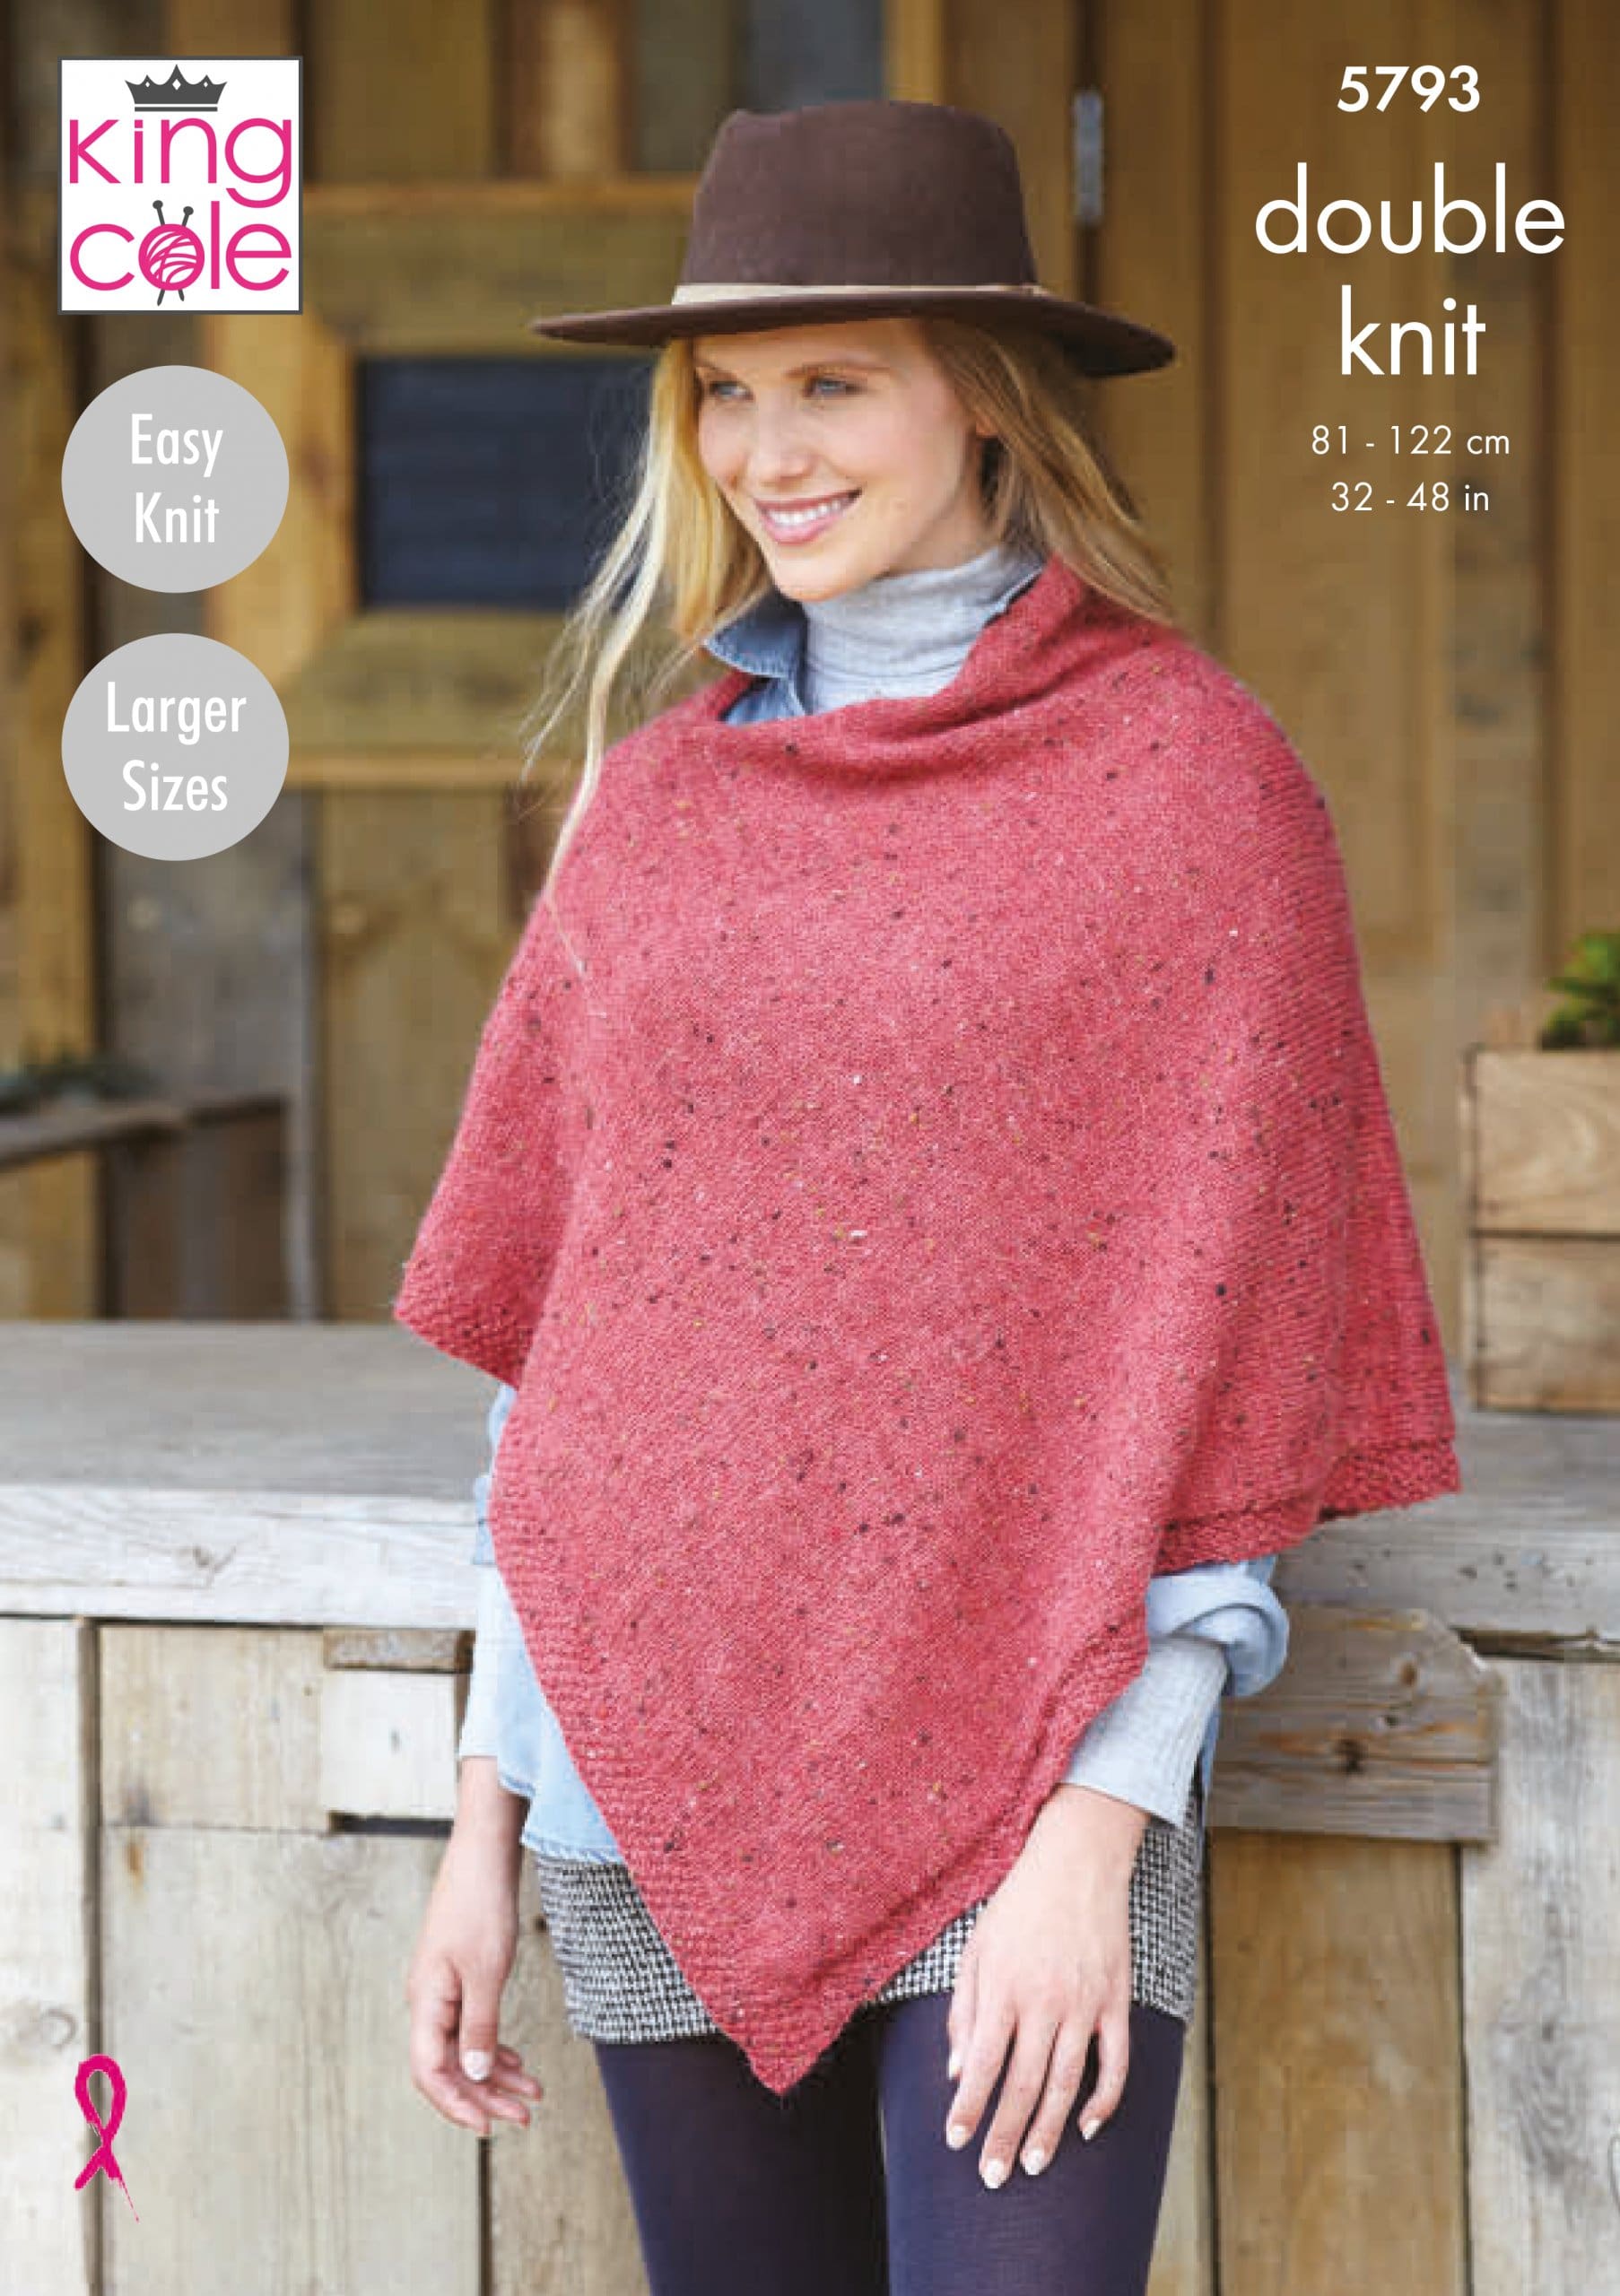 Easy to Follow Ponchos Knitted in Homespun DK Knitting Patterns King Cole